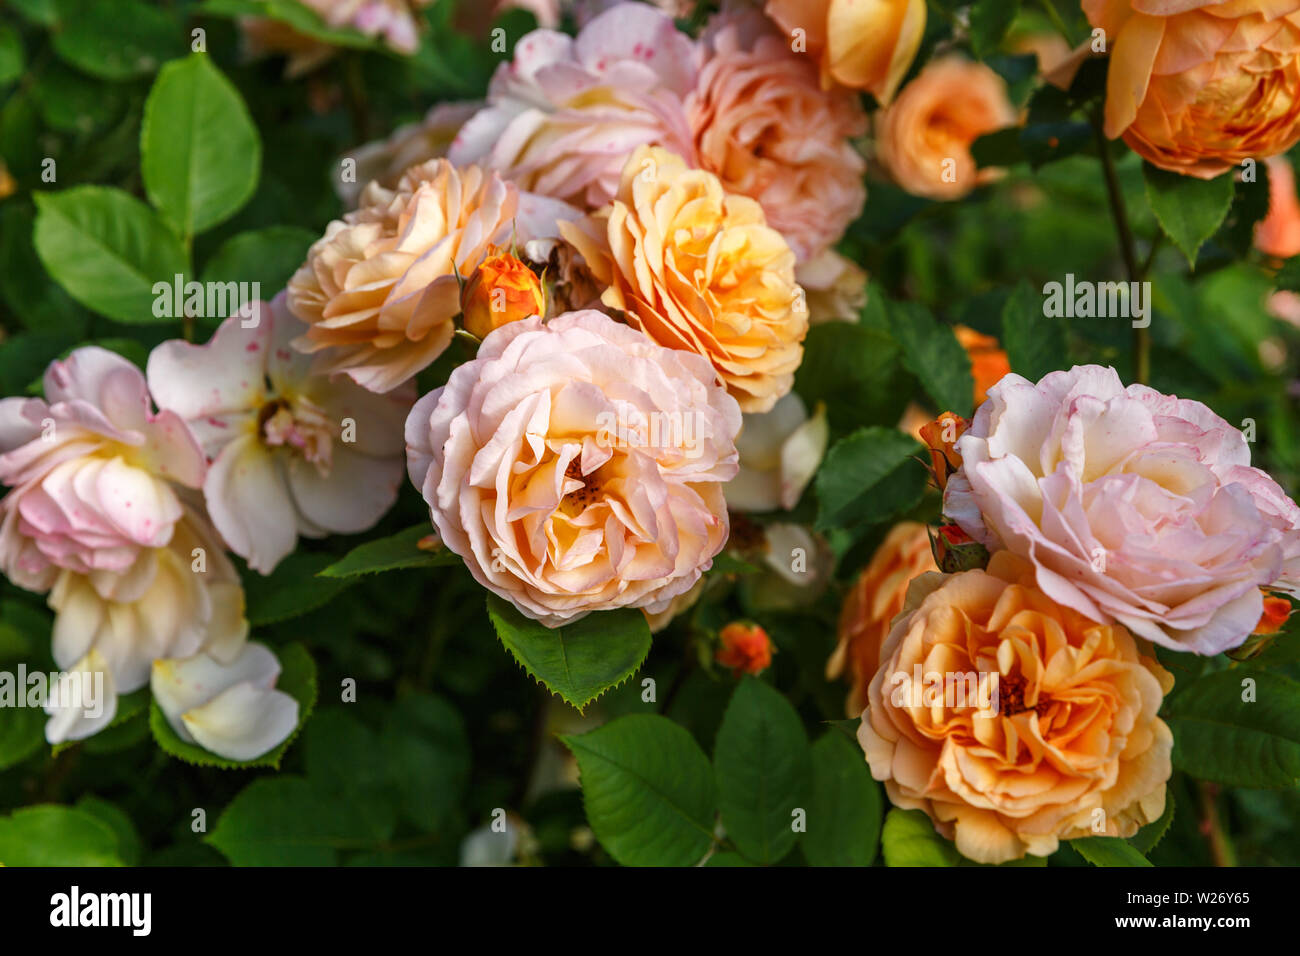 Blooming yellow orange roses in the garden on a sunny day. Charles Austin' Rose Stock Photo